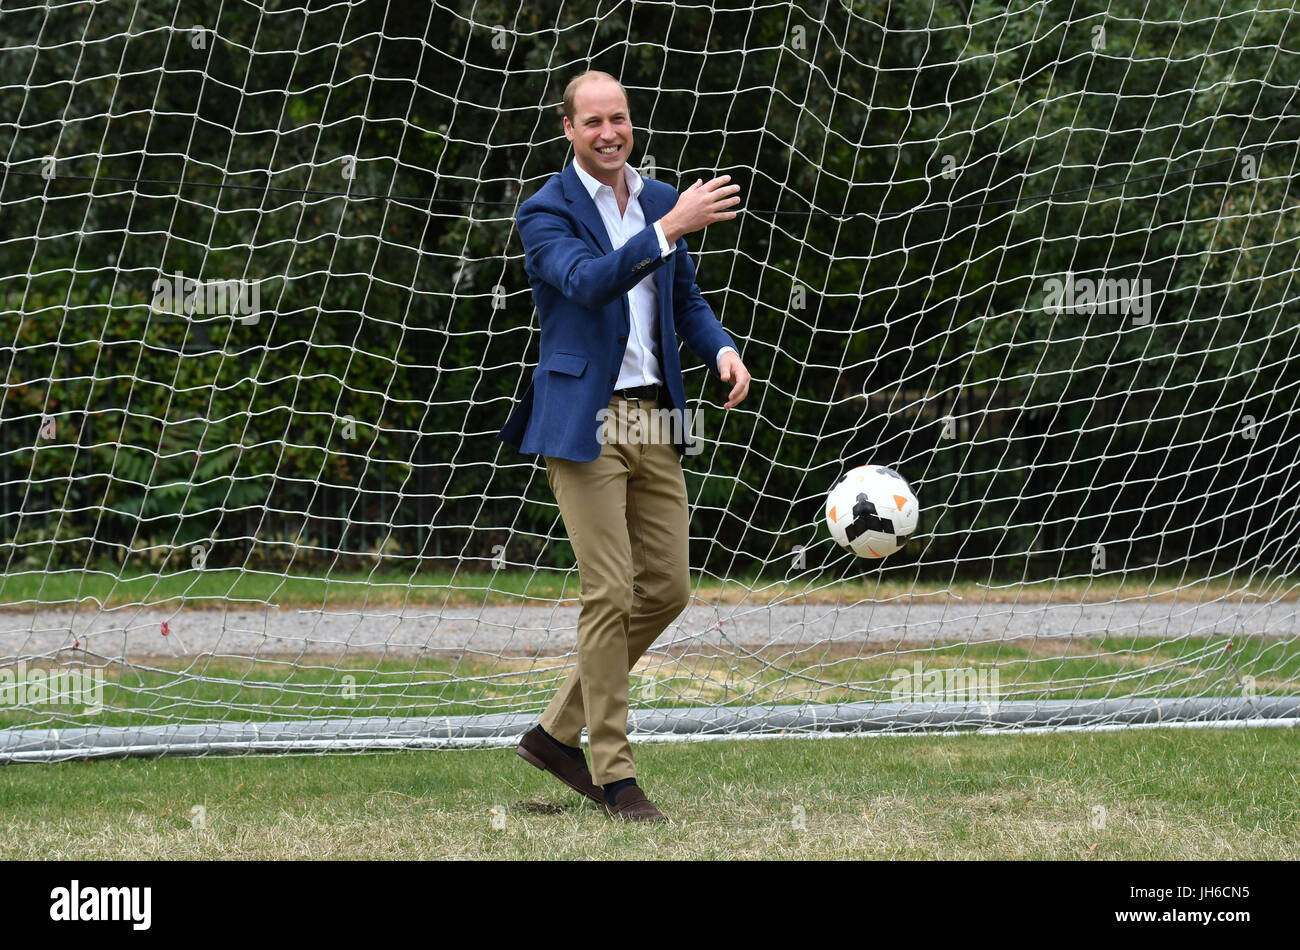 The Duke of Cambridge goes in goal as he hosts a reception for the England Women football team at Kensington Palace in London. Stock Photo